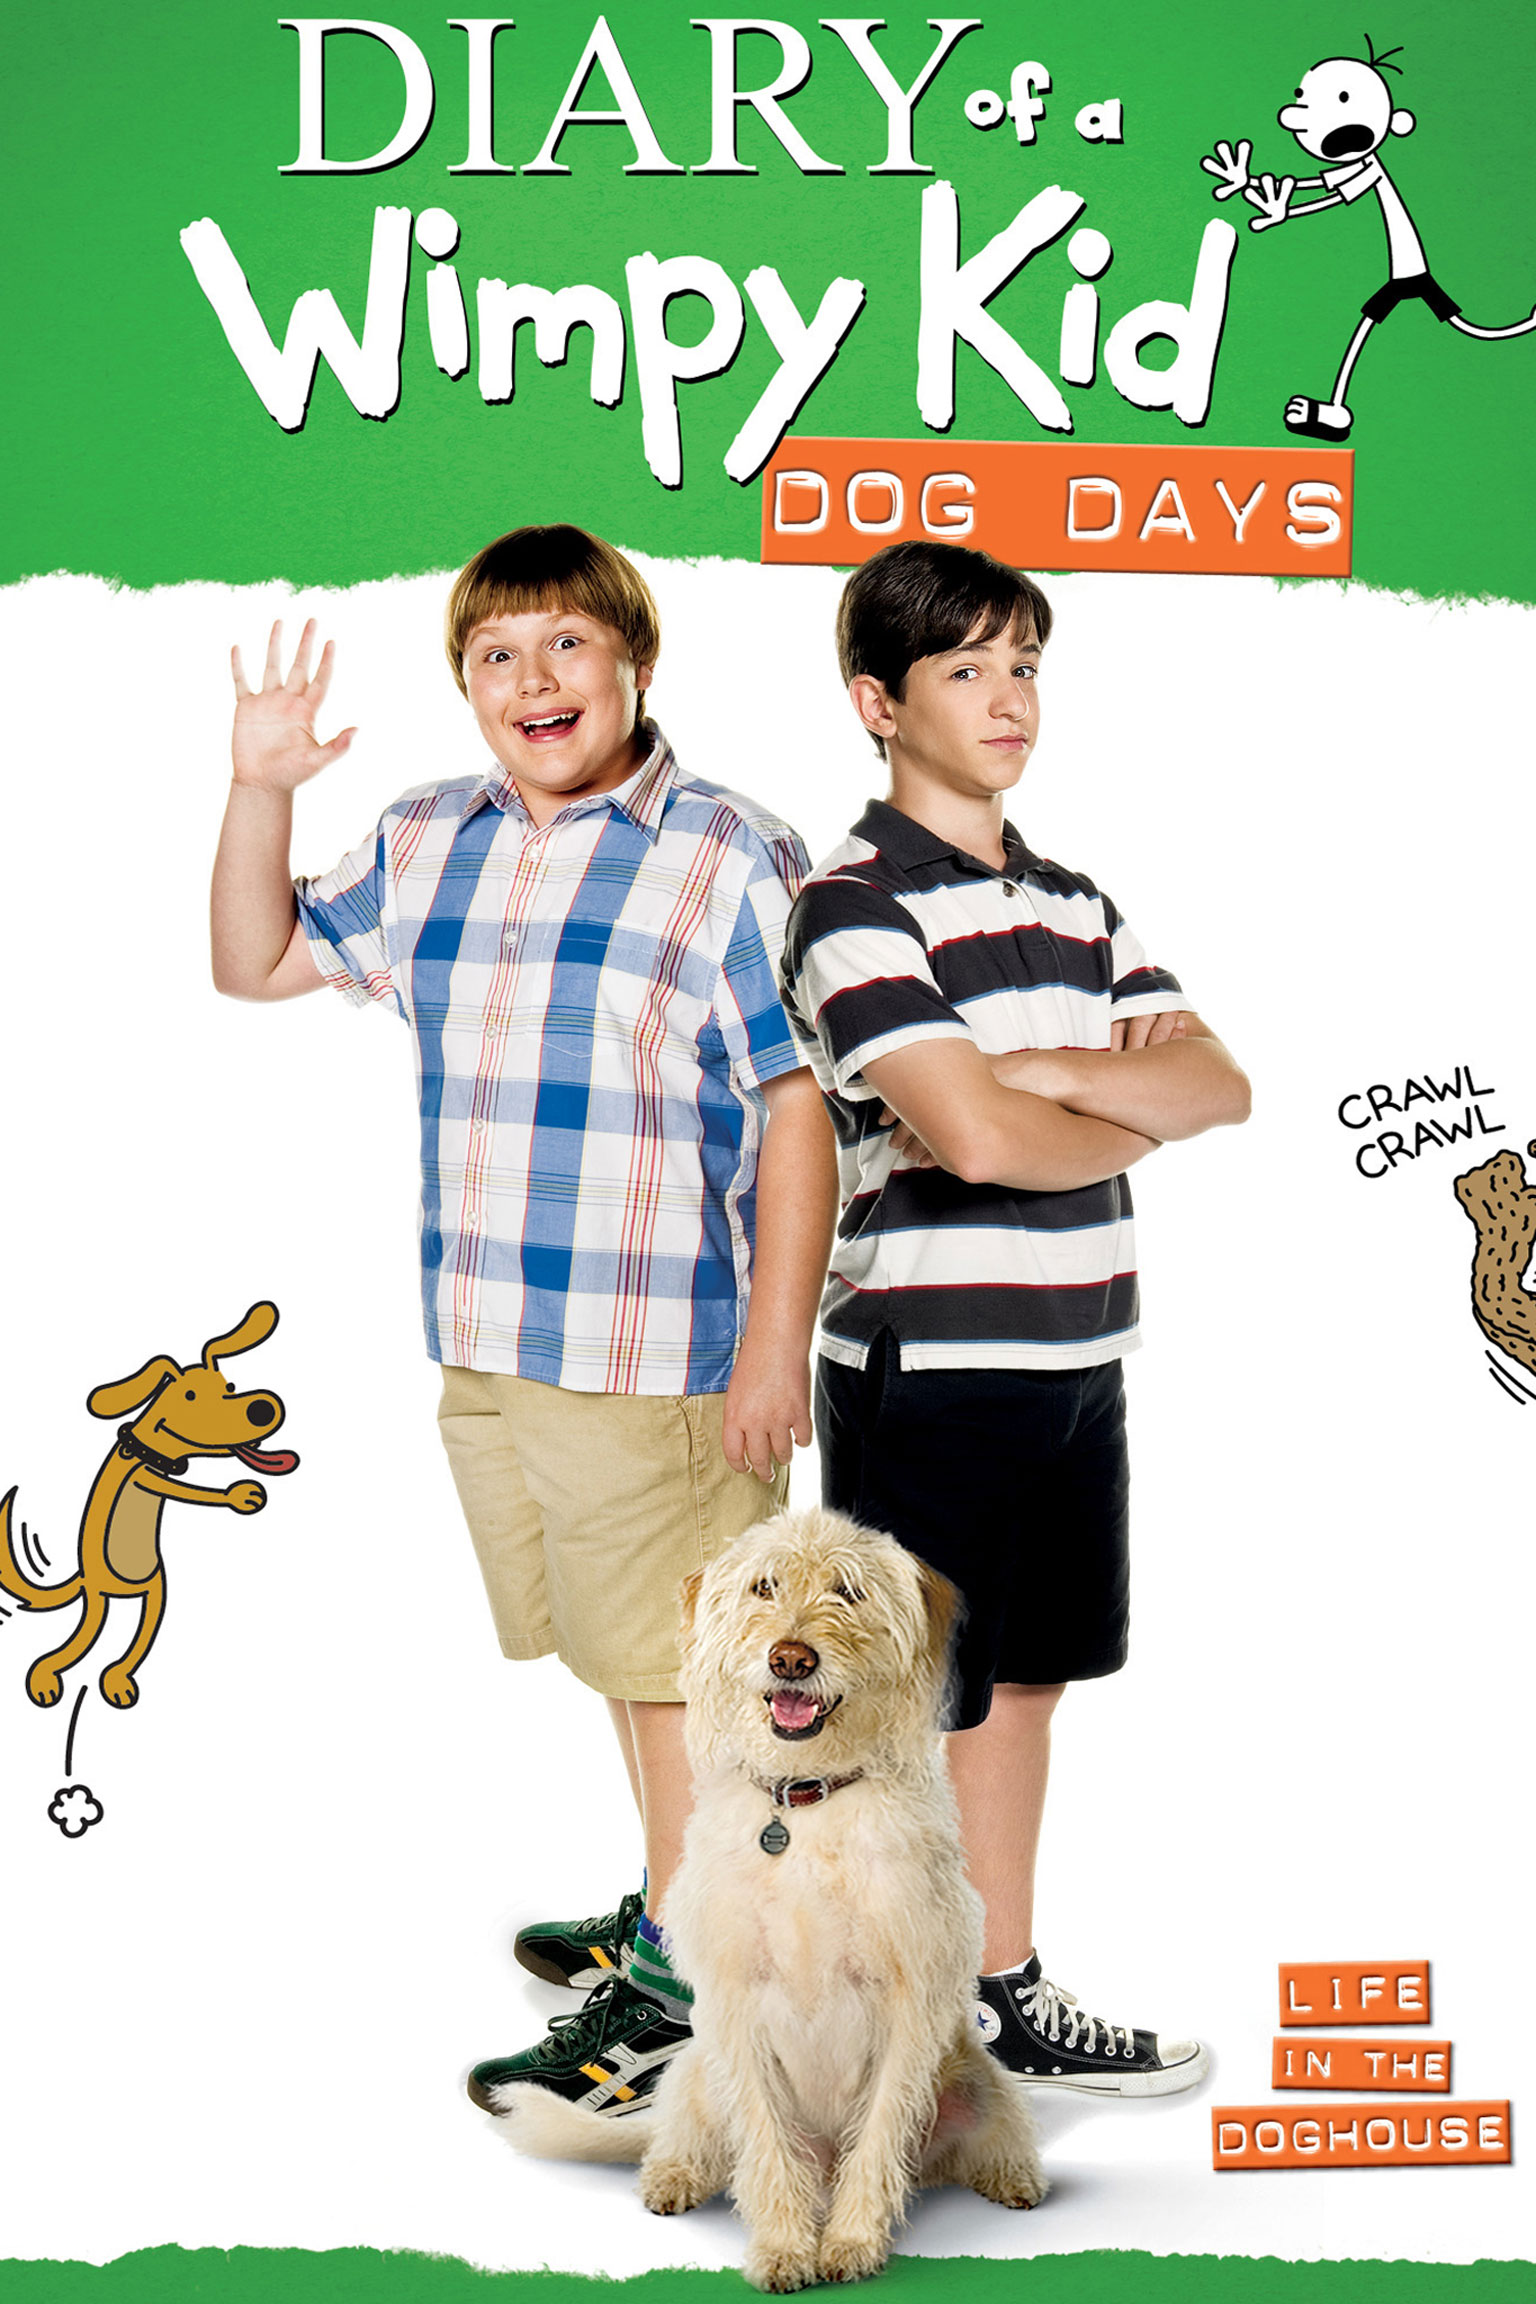 essay on diary of a wimpy kid dog days